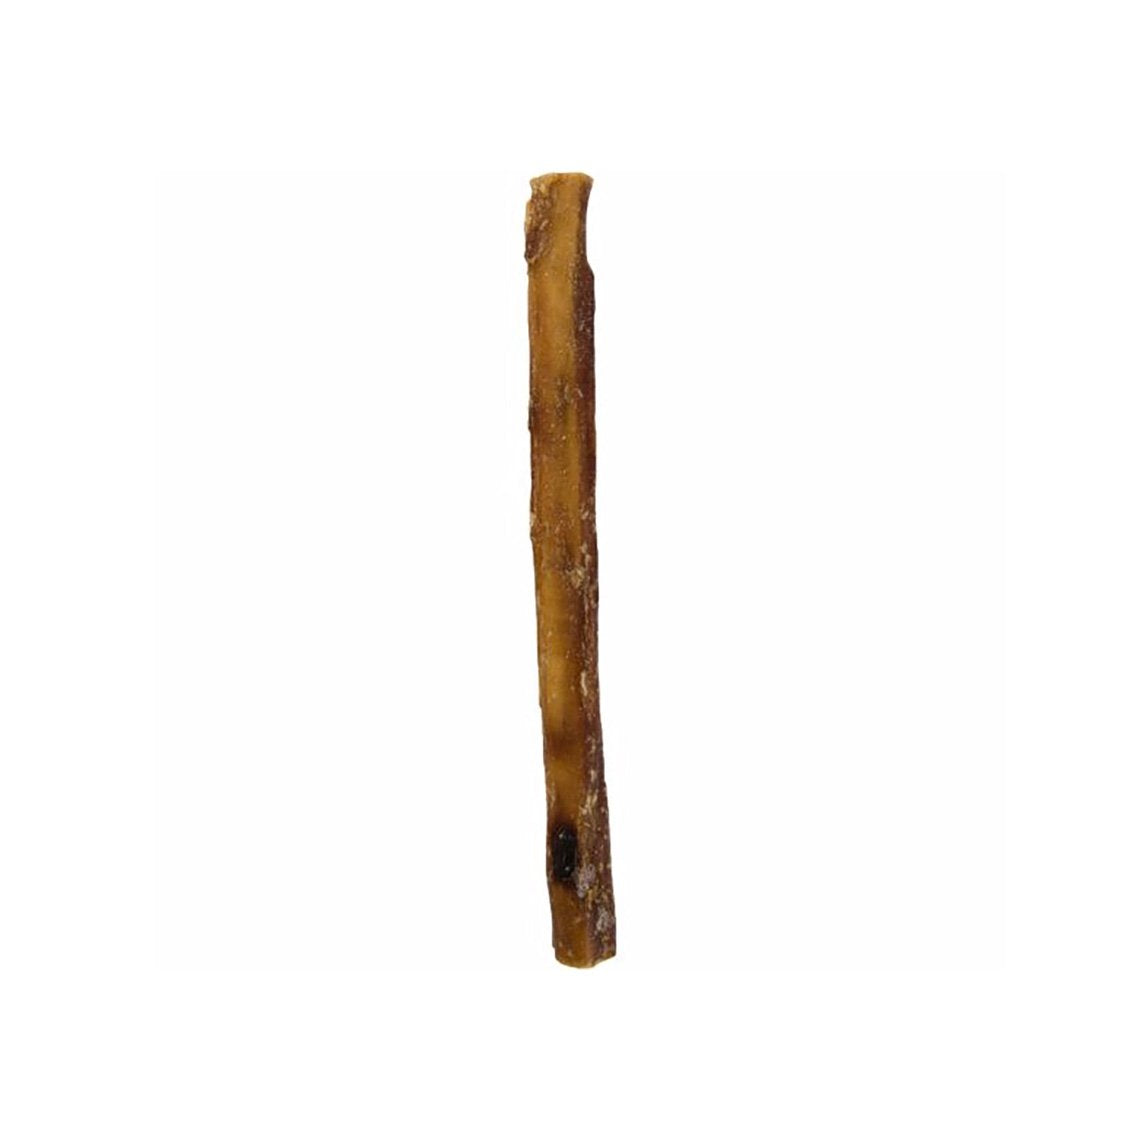 Only Natural Pet Free Range Extra Thick Bully Sticks for Dogs | Only ...